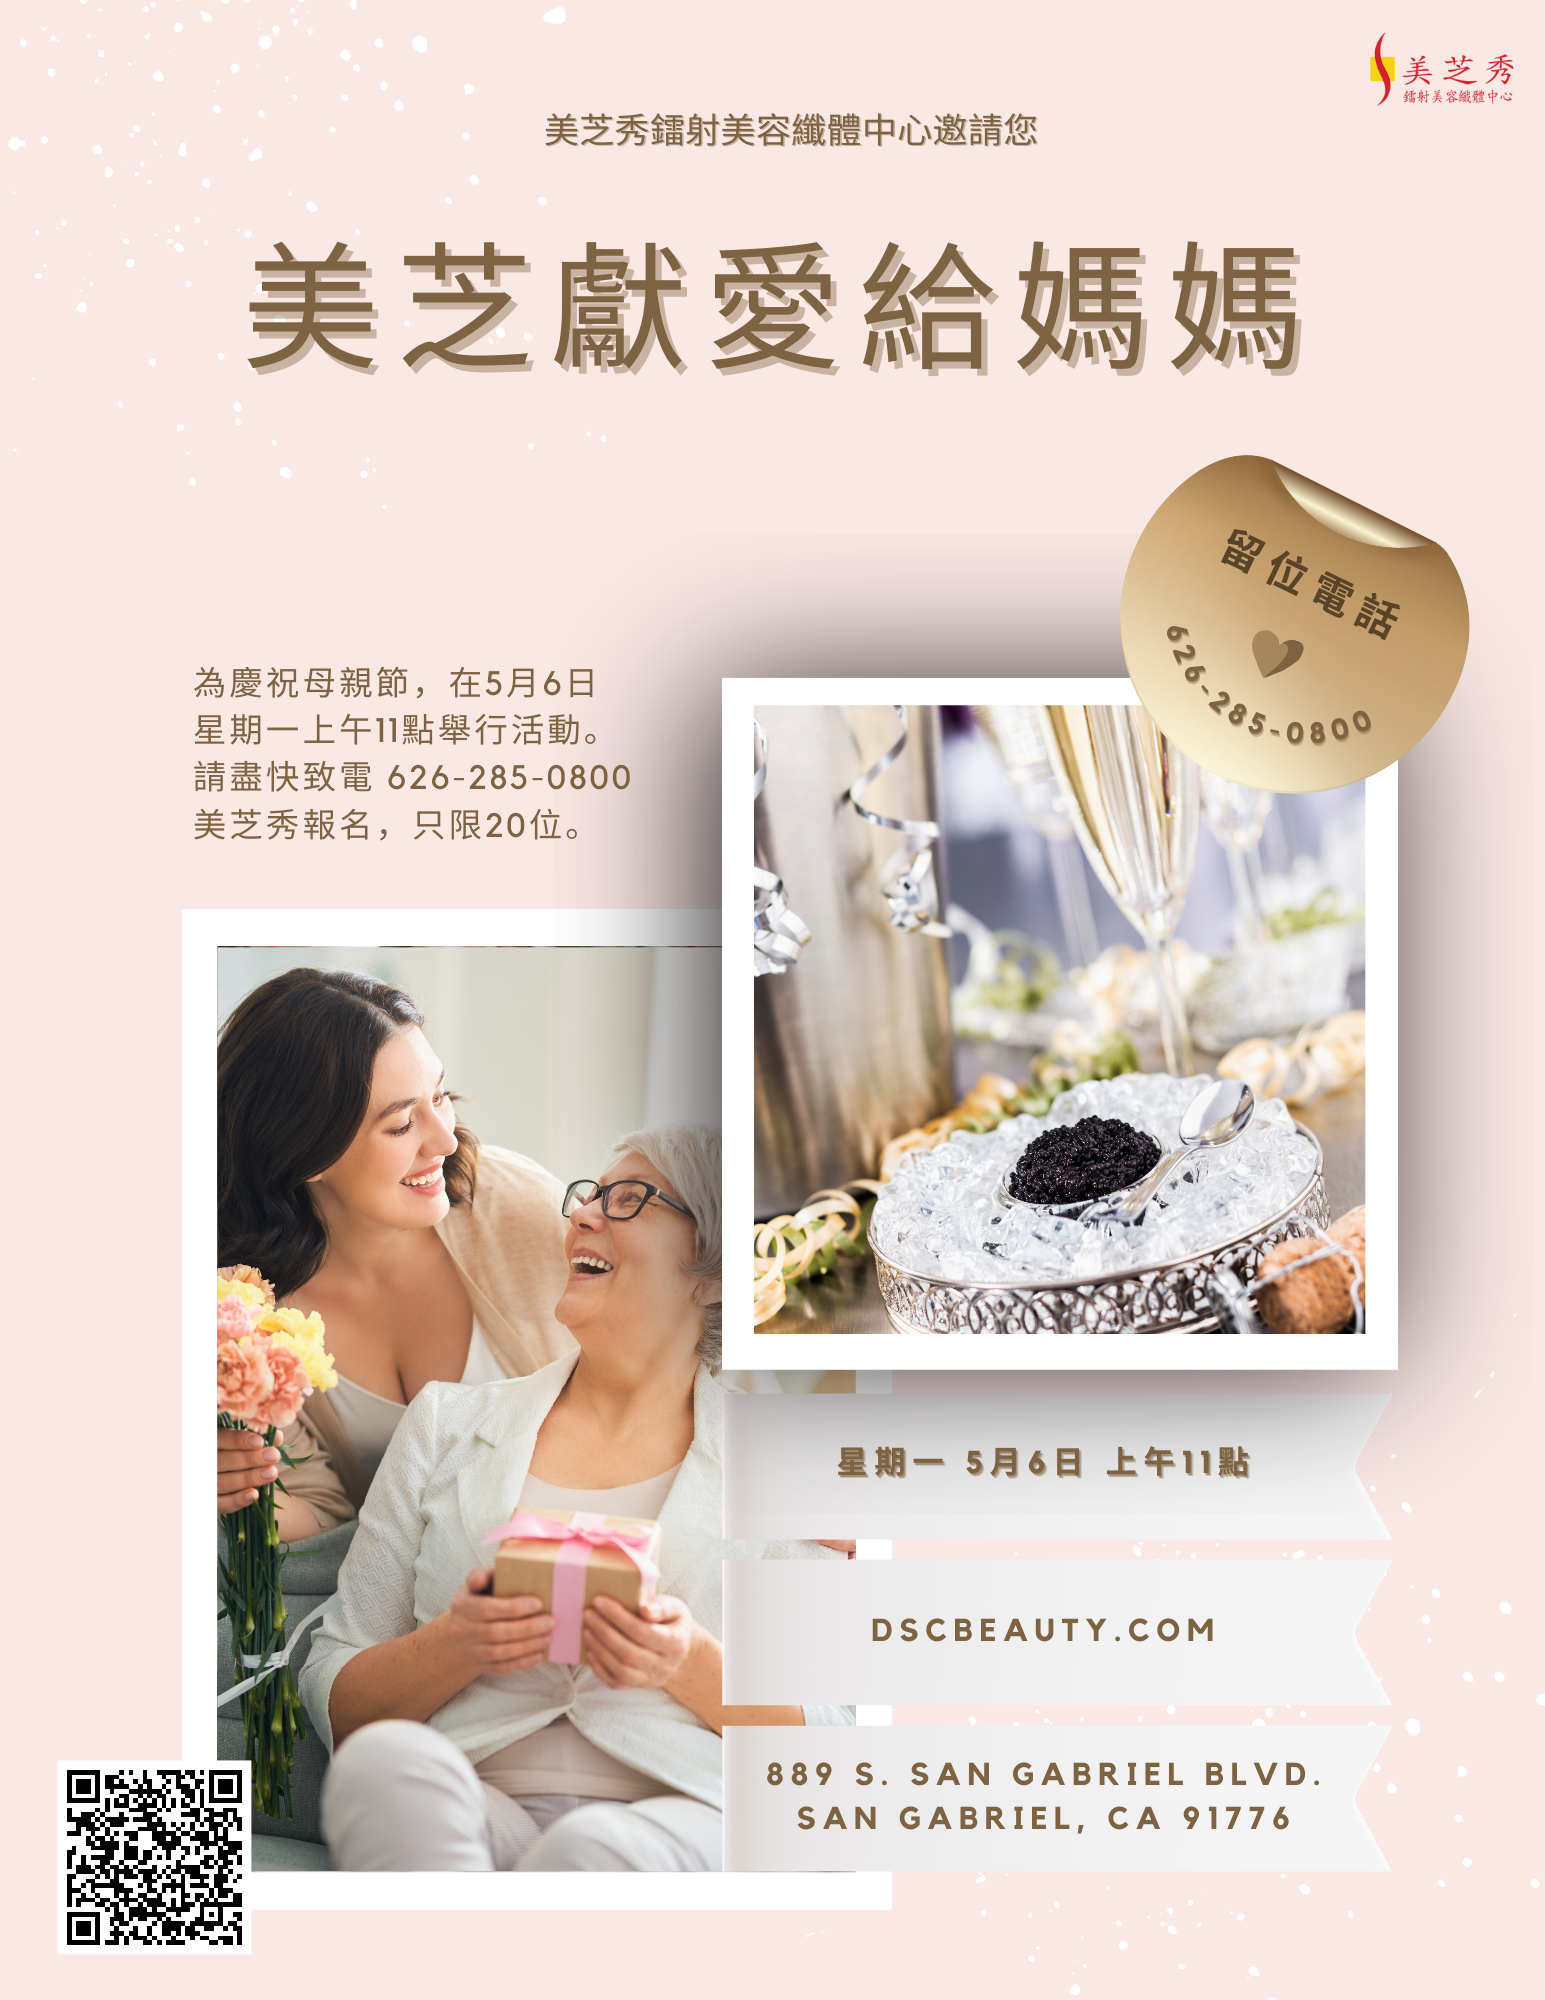 DSC Mother's Day Event 2024 Flyer Botox & Caviar on 5/6/2024 at 11AM DSC Flyer for Mother's Day celebration event with image of caviar, mother and daughter in Chinese